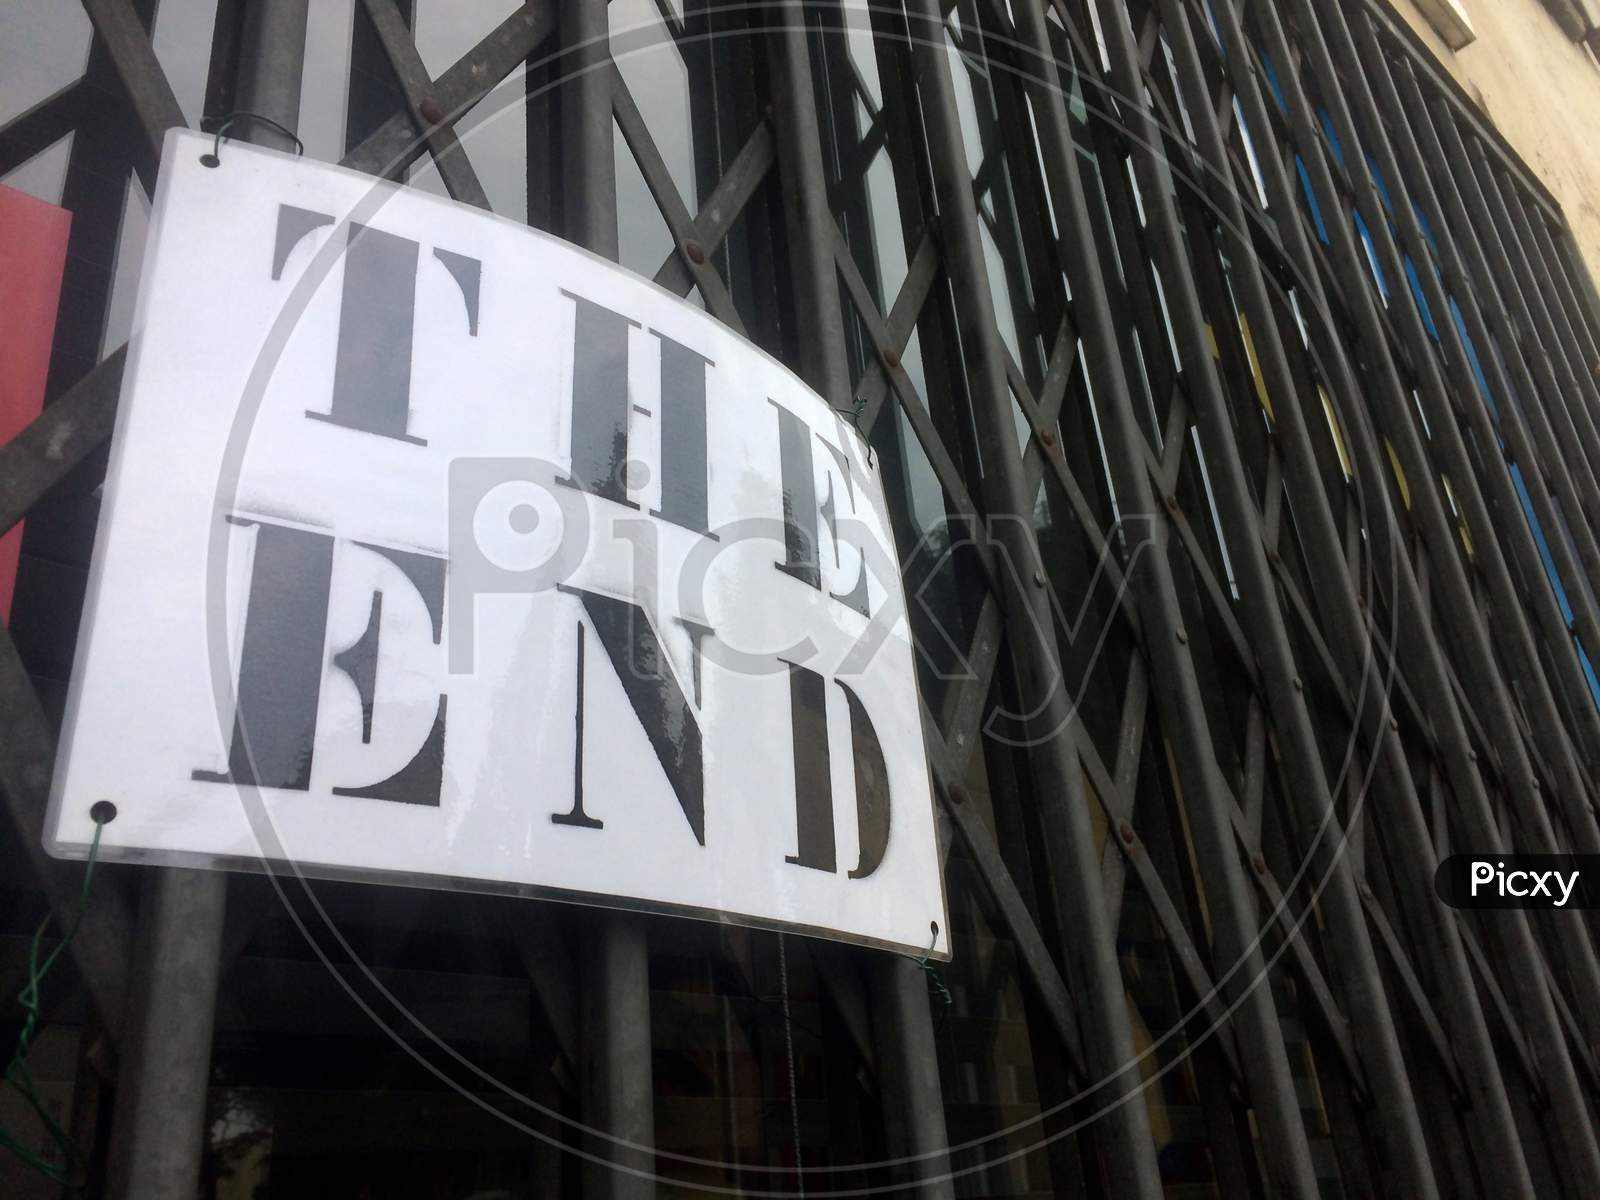 The End Sign Hanging In Front Of A Closed Store